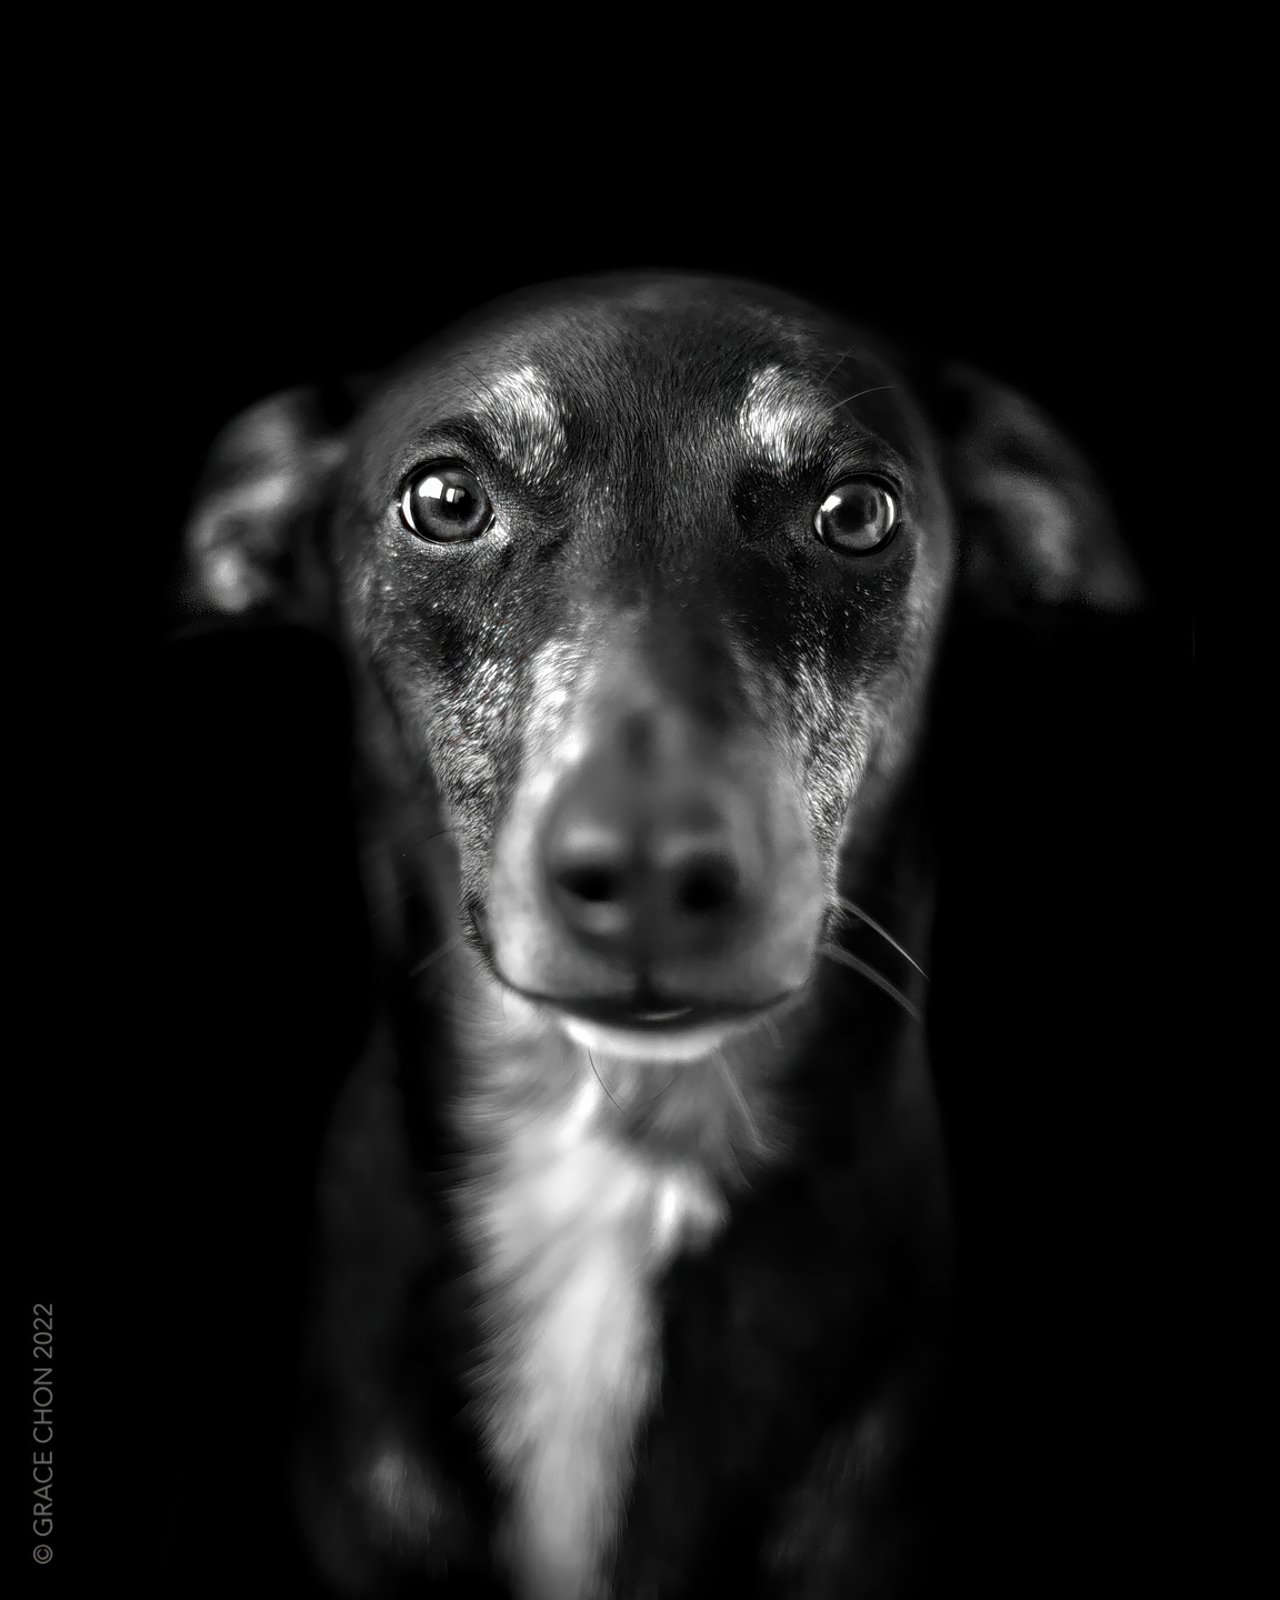 A black-and-white portrait of a dog with a sleek, dark coat and white markings on its chest. The dog's large, expressive eyes gaze directly at the camera against a solid black background, creating a striking contrast. Photo credit: Grace Chon 2022.